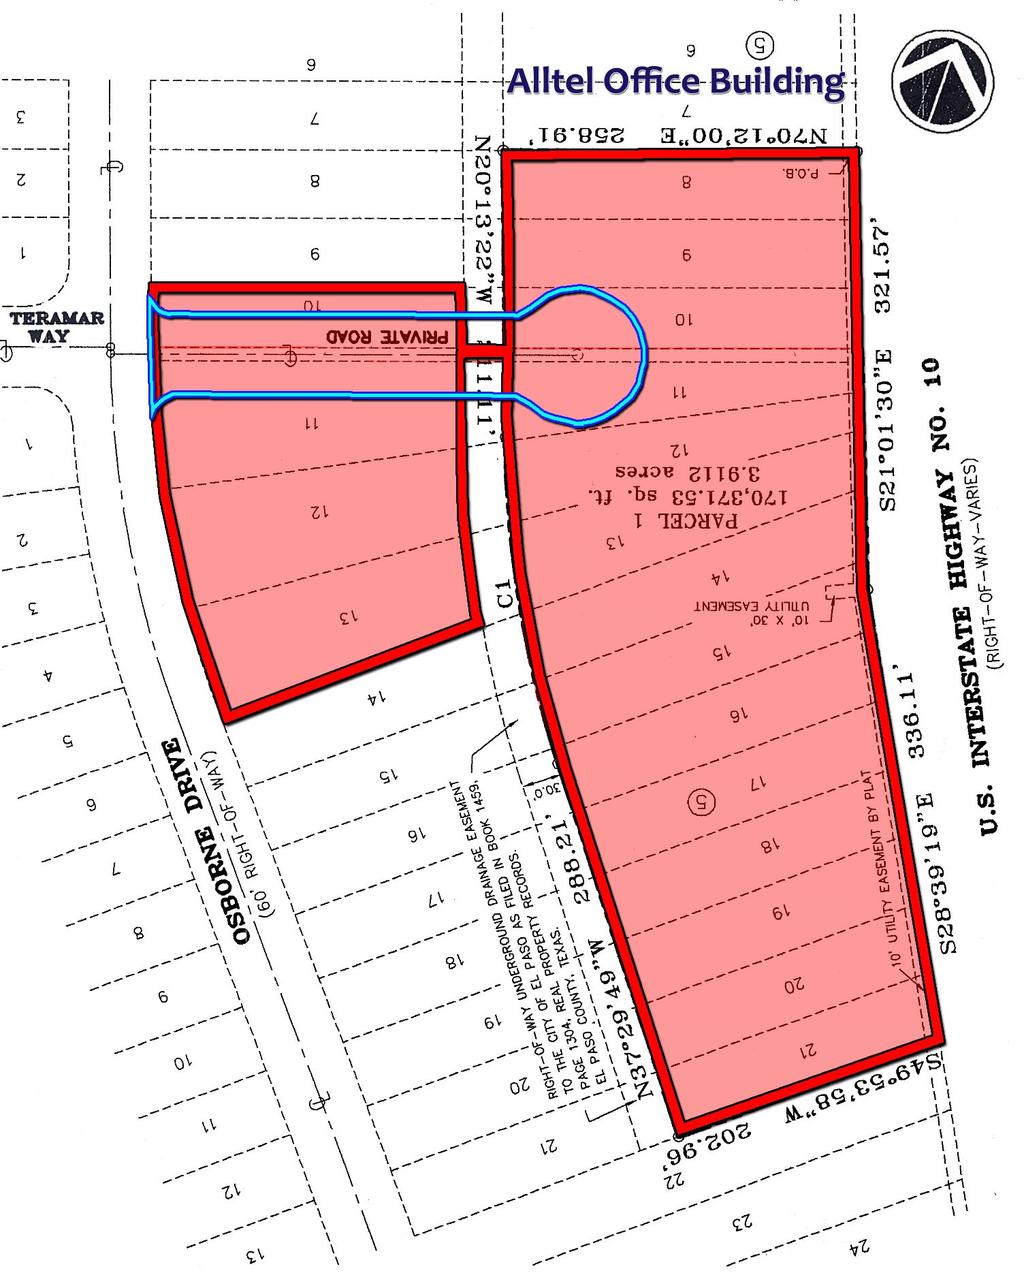 SITE INFORMATION Legal Description: Being portions of Lots 8 thru 21 & a portion of a 10 FT drainage right-of-way, Block 5, Zach White Industrial District; being portions of Lots 10 thru 11 & a